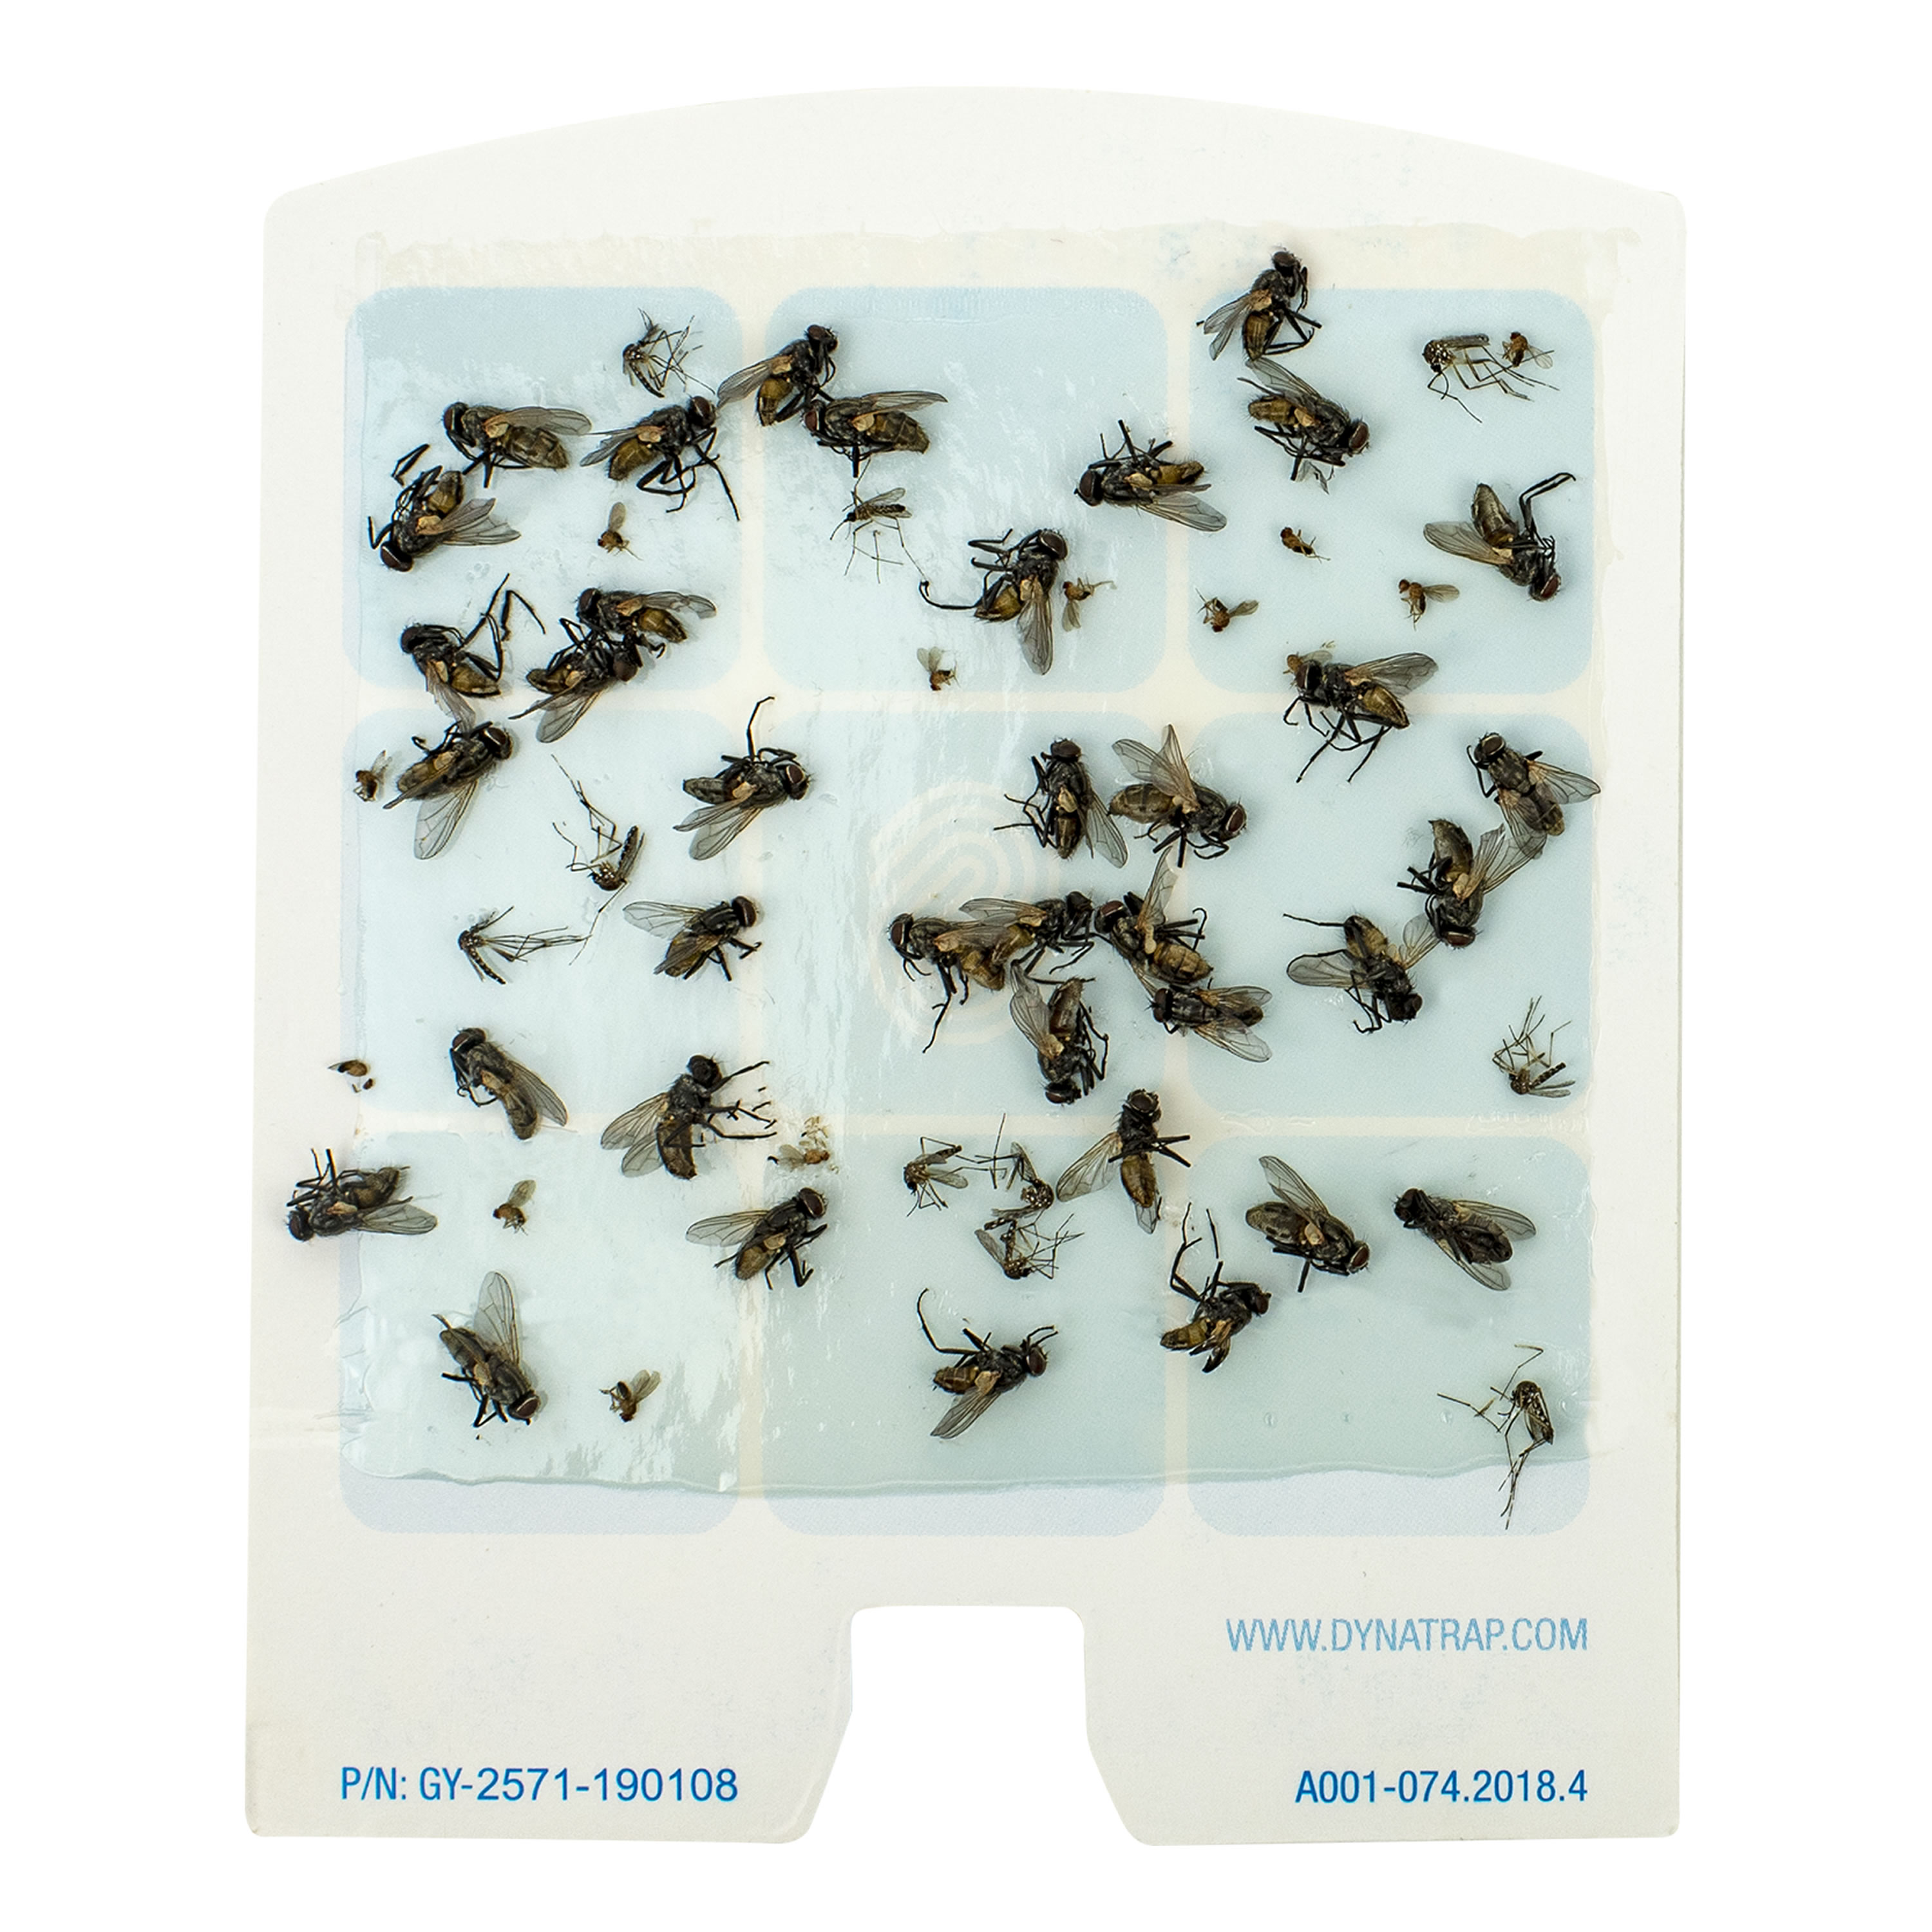 Replacement Glue Plates for Flying Insect Trap VF01 - Pack of 10